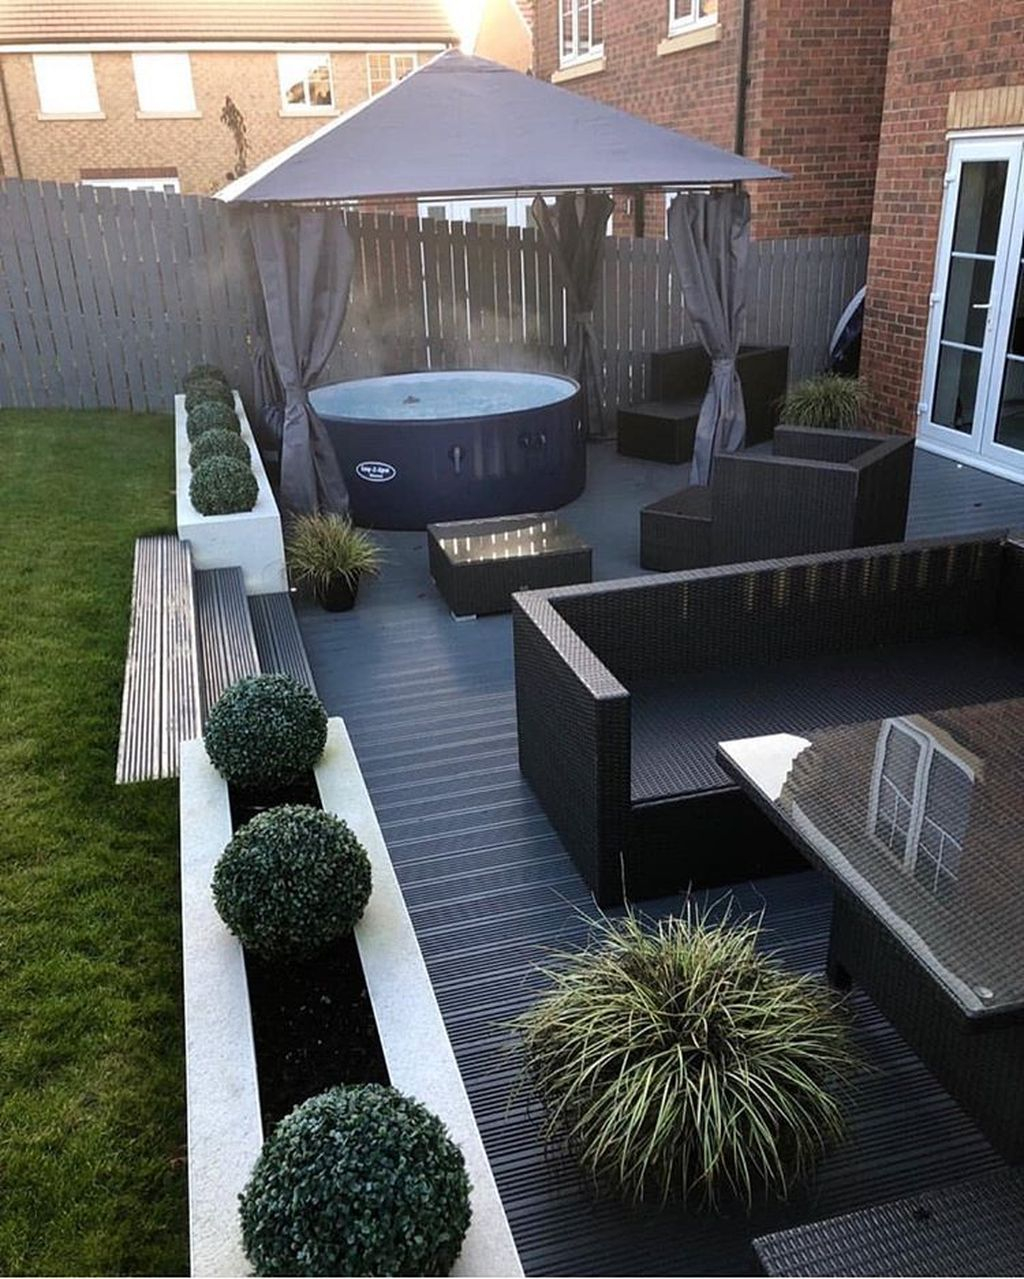 Outstanding Garden Design Ideas With Best Style To Try38